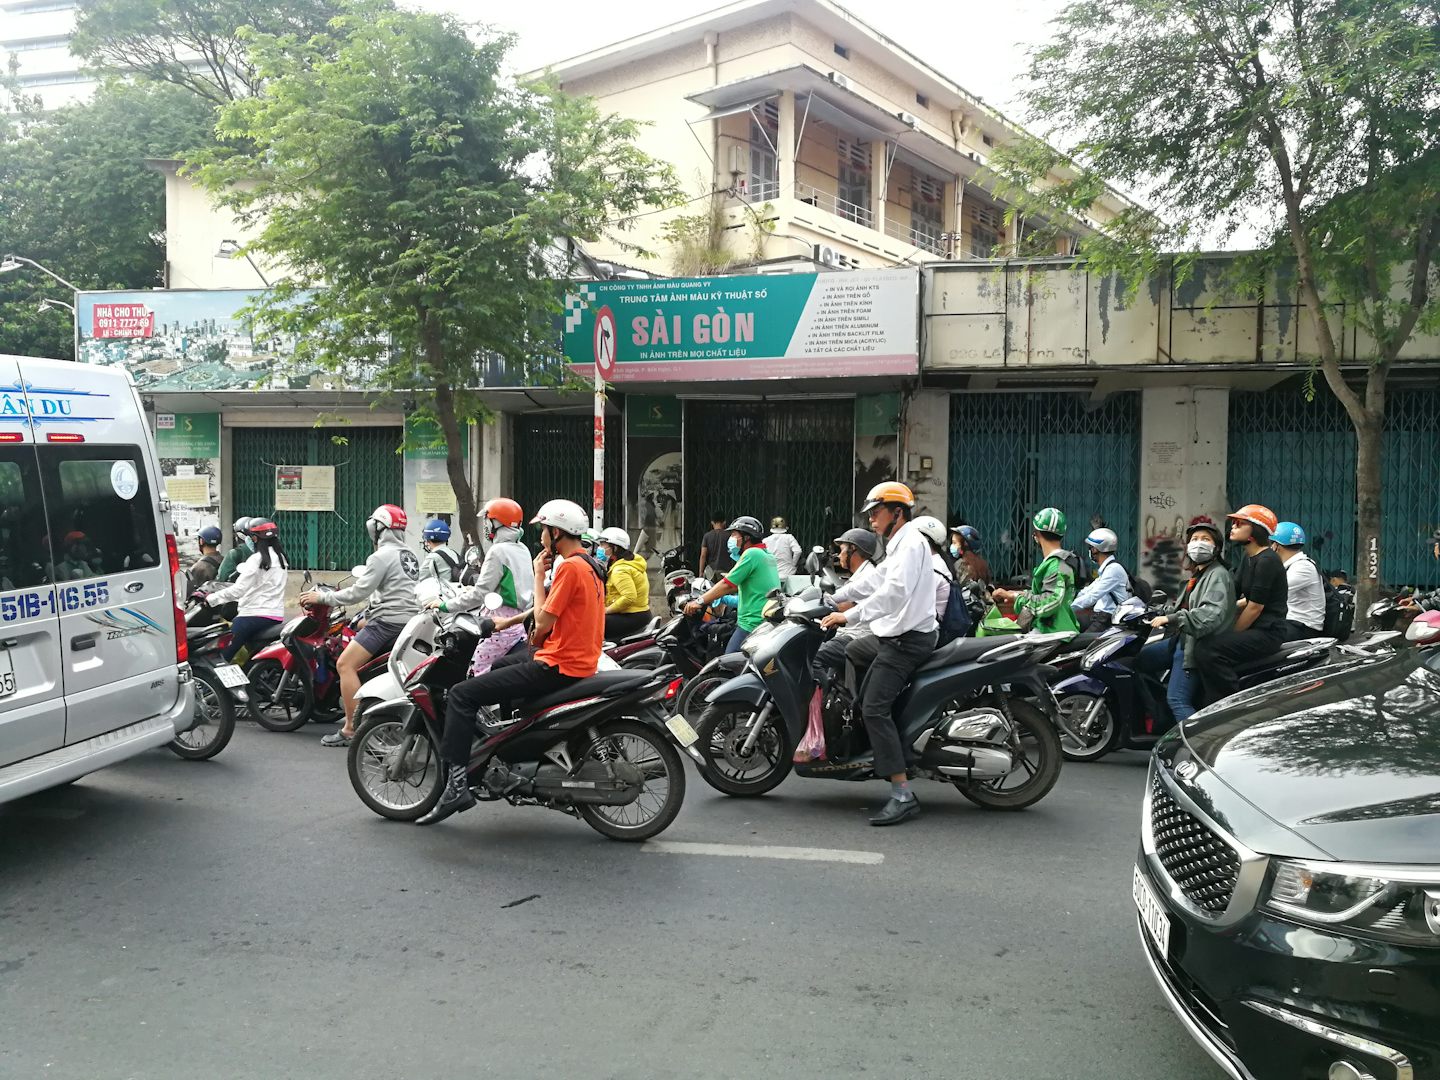 Typical scene from Ho Chi Minh City